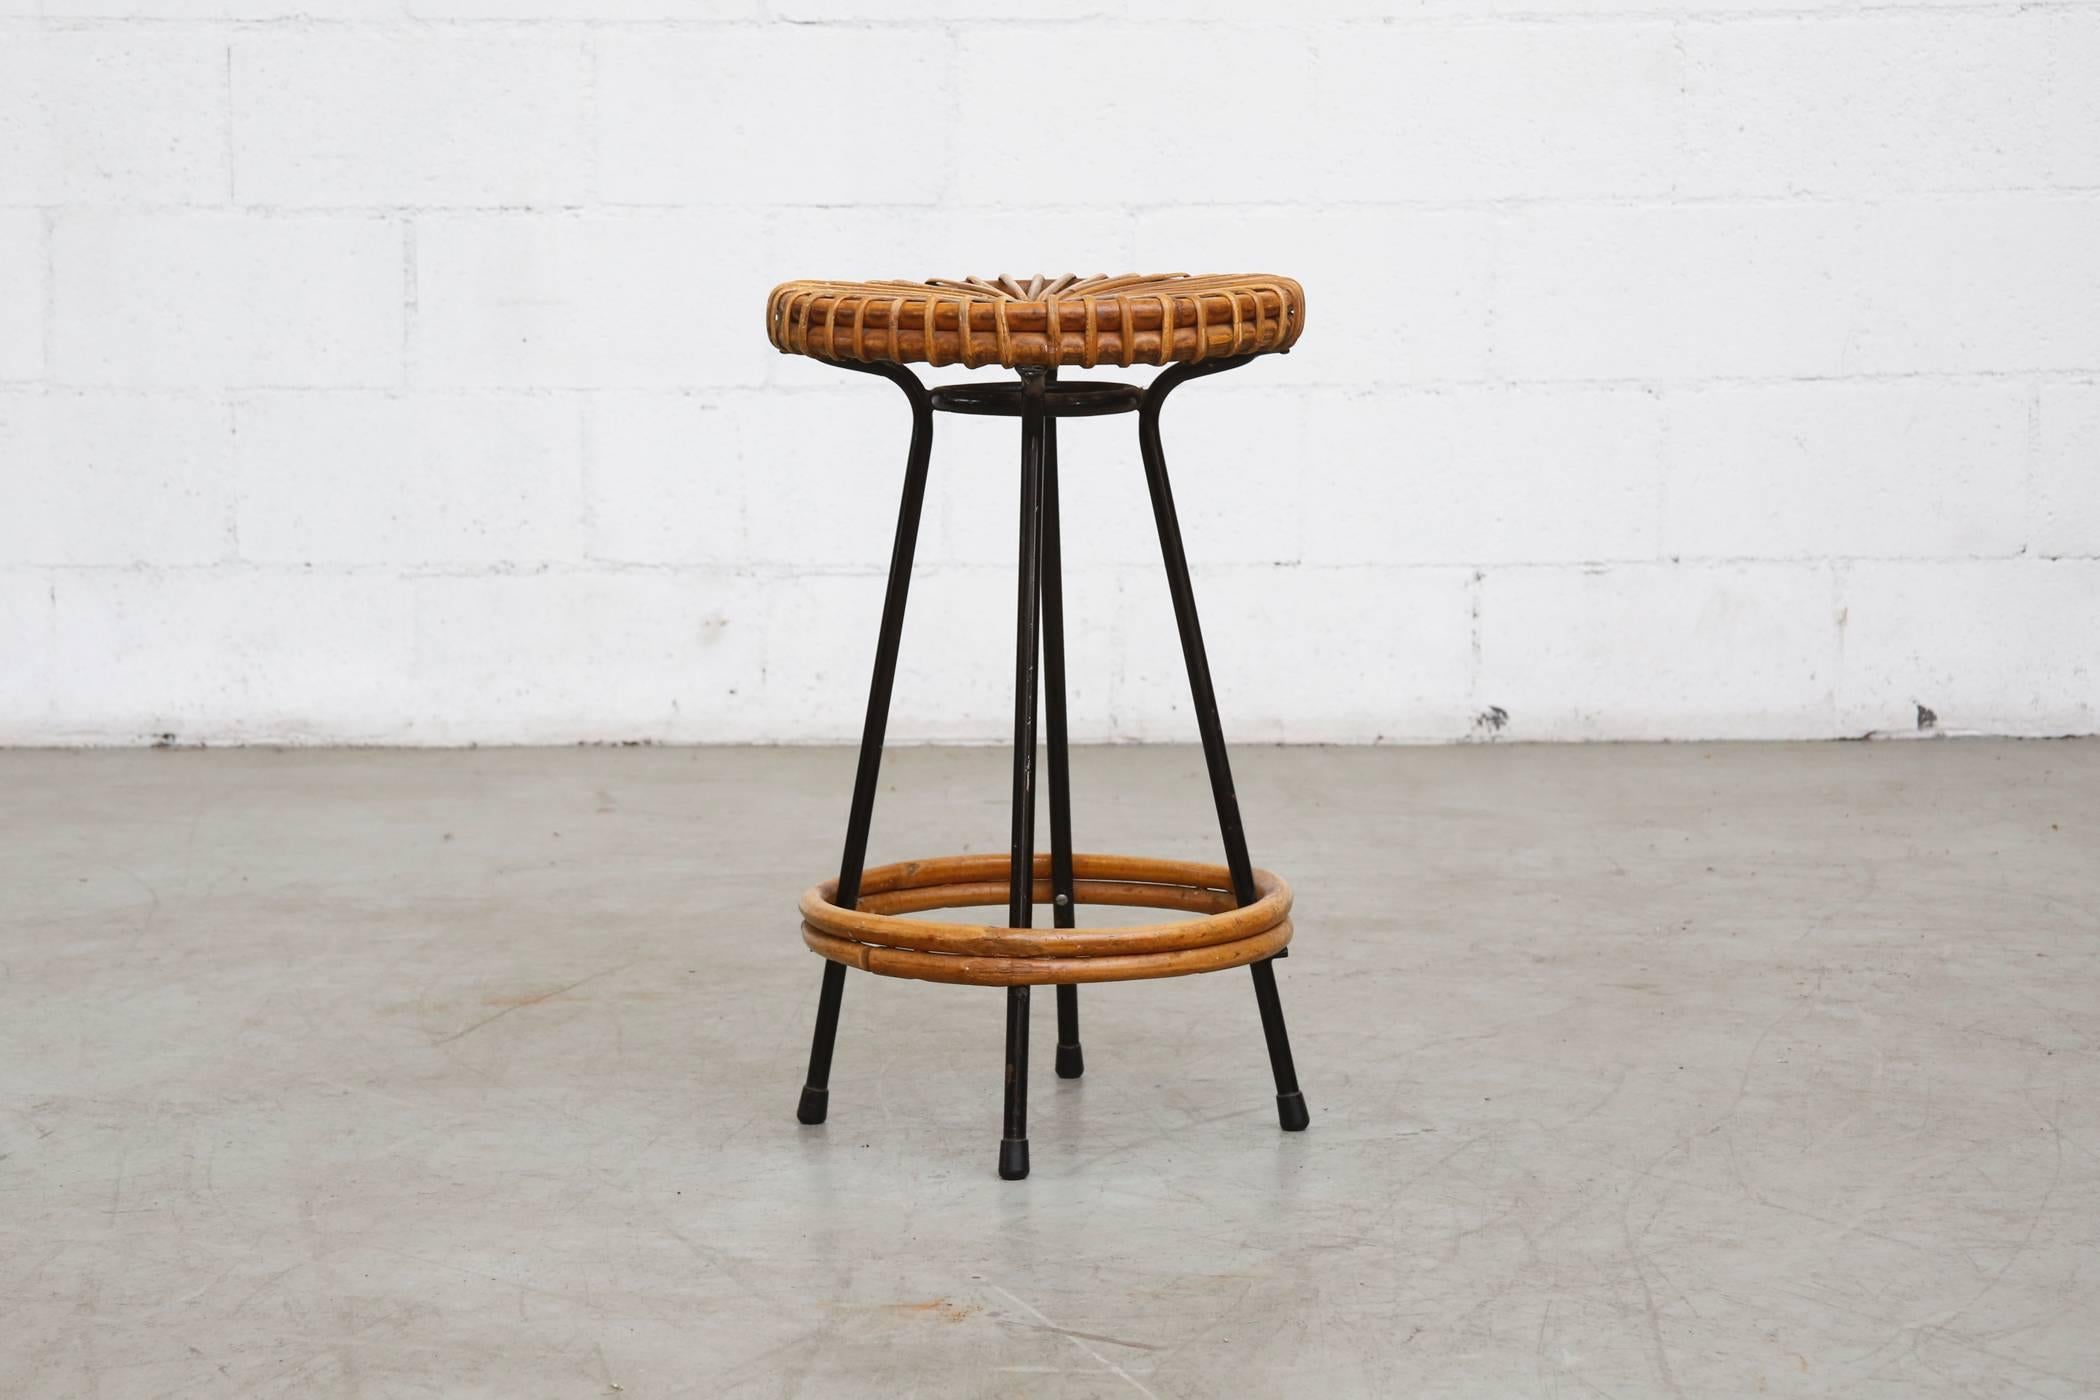 Great wire framed stools with woven bamboo seat and matching bamboo foot rest. Original condition with some wear to bamboo and enamel frame consistent with age and use. Set price.